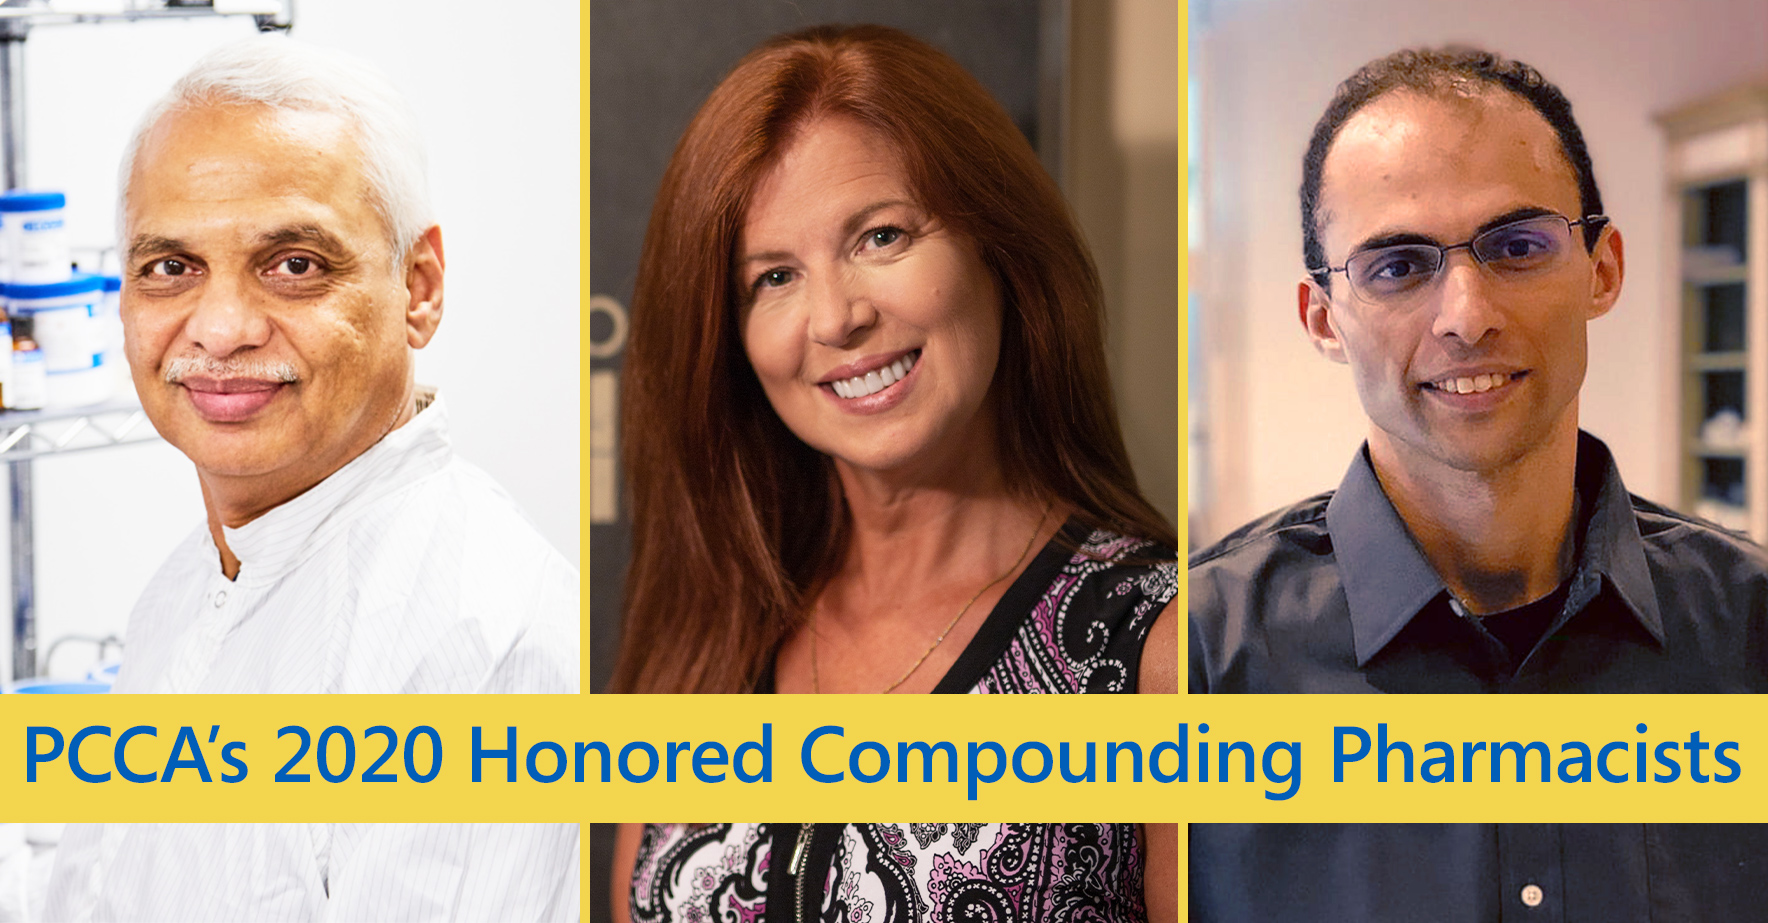 pcca_2020_honored_compounding_pharmacists.jpg.